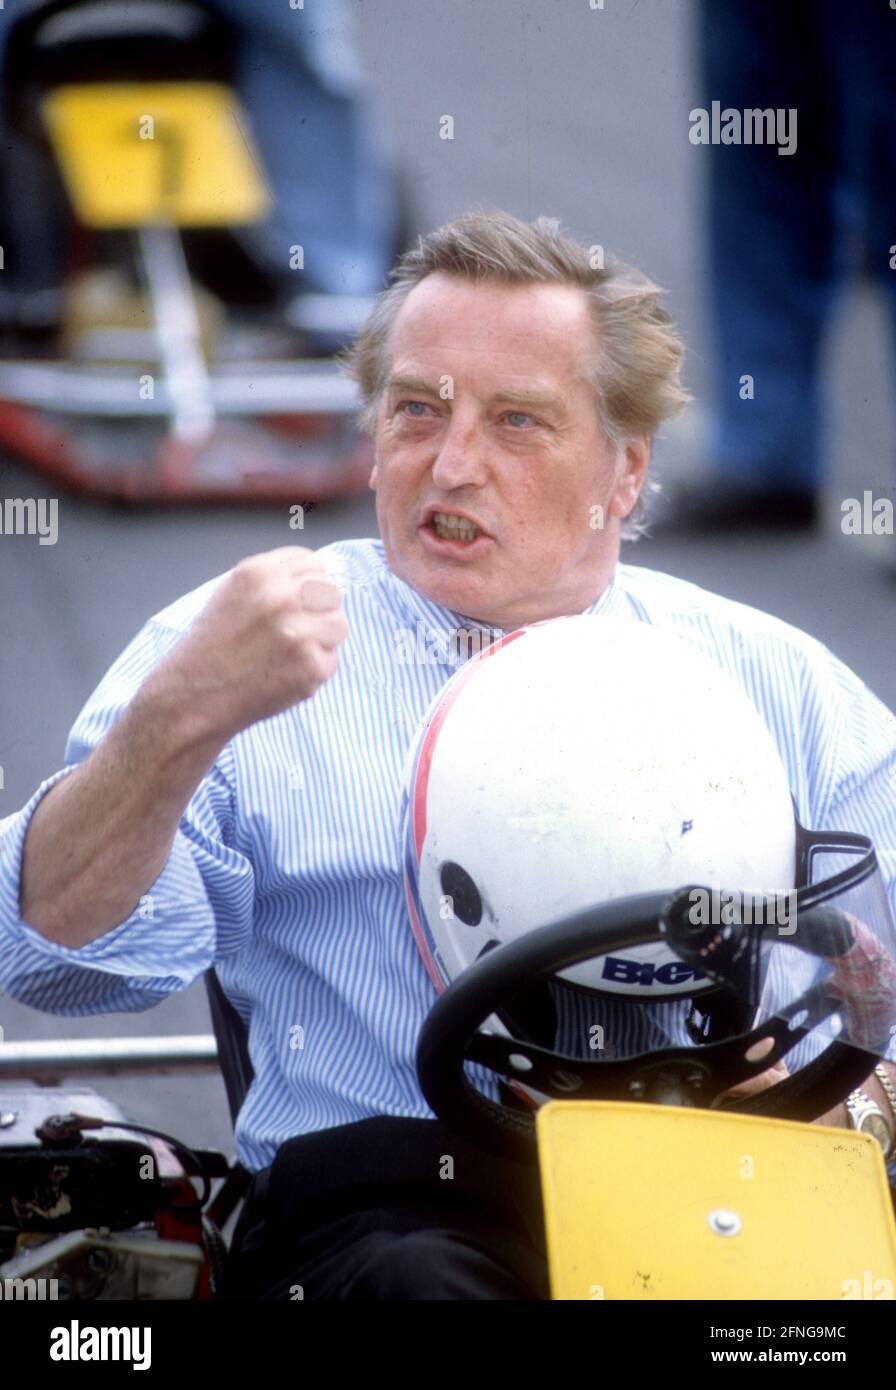 European Football Championship 1992 in Sweden: kart race in Norköpping. The president of VFB Stuttgart and later DFB president Gerhard Mayer-Vorfelder in the kart, combative, clenching his fist. 09.06.1992. [automated translation] Stock Photo